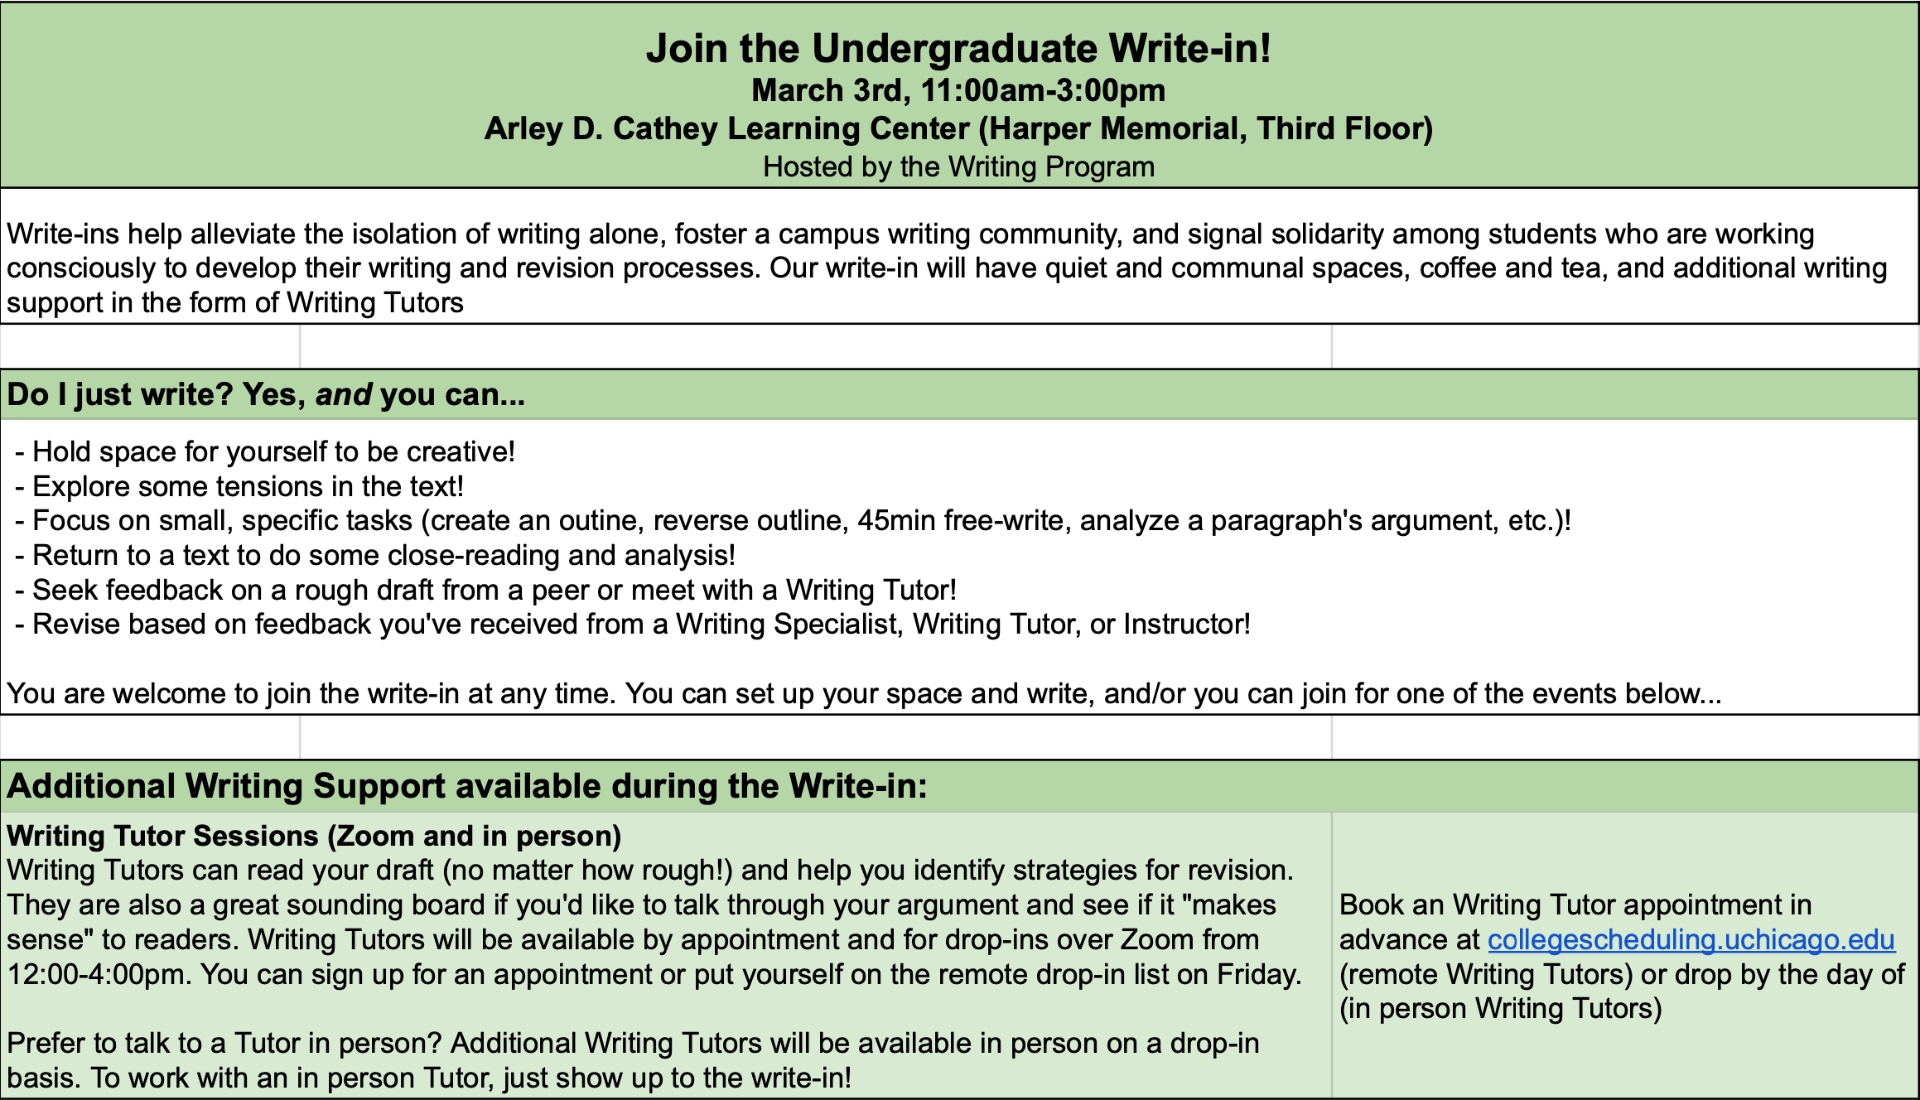 Undergraduate Write-In Information: Friday, March 3rd, 11:00am-3:00pm